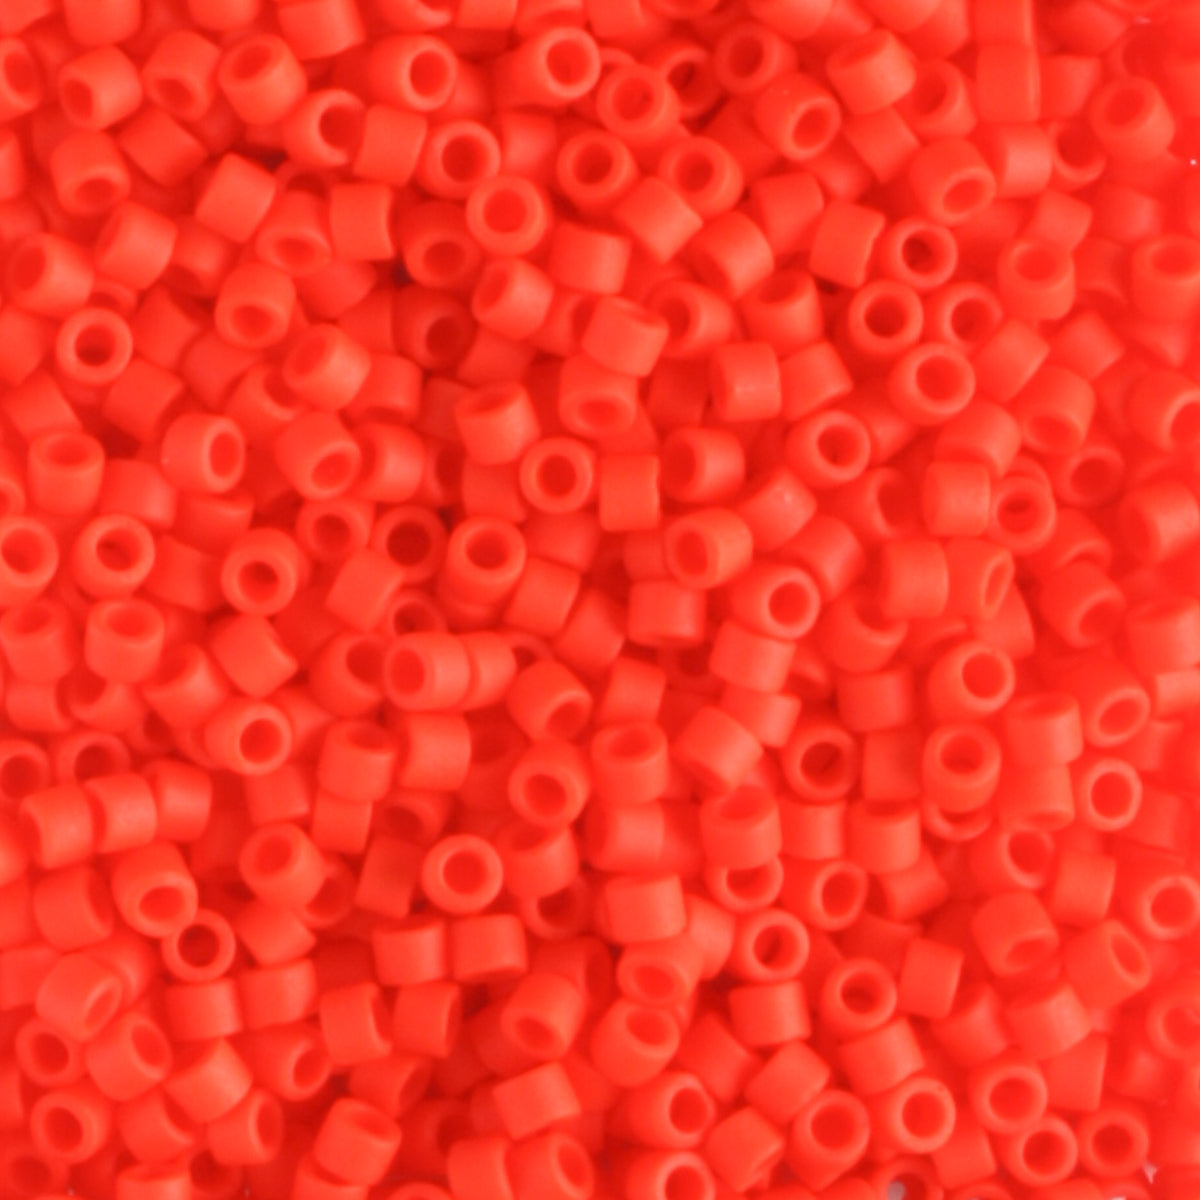 DB0757 Opaque Matte Red - 5 grams